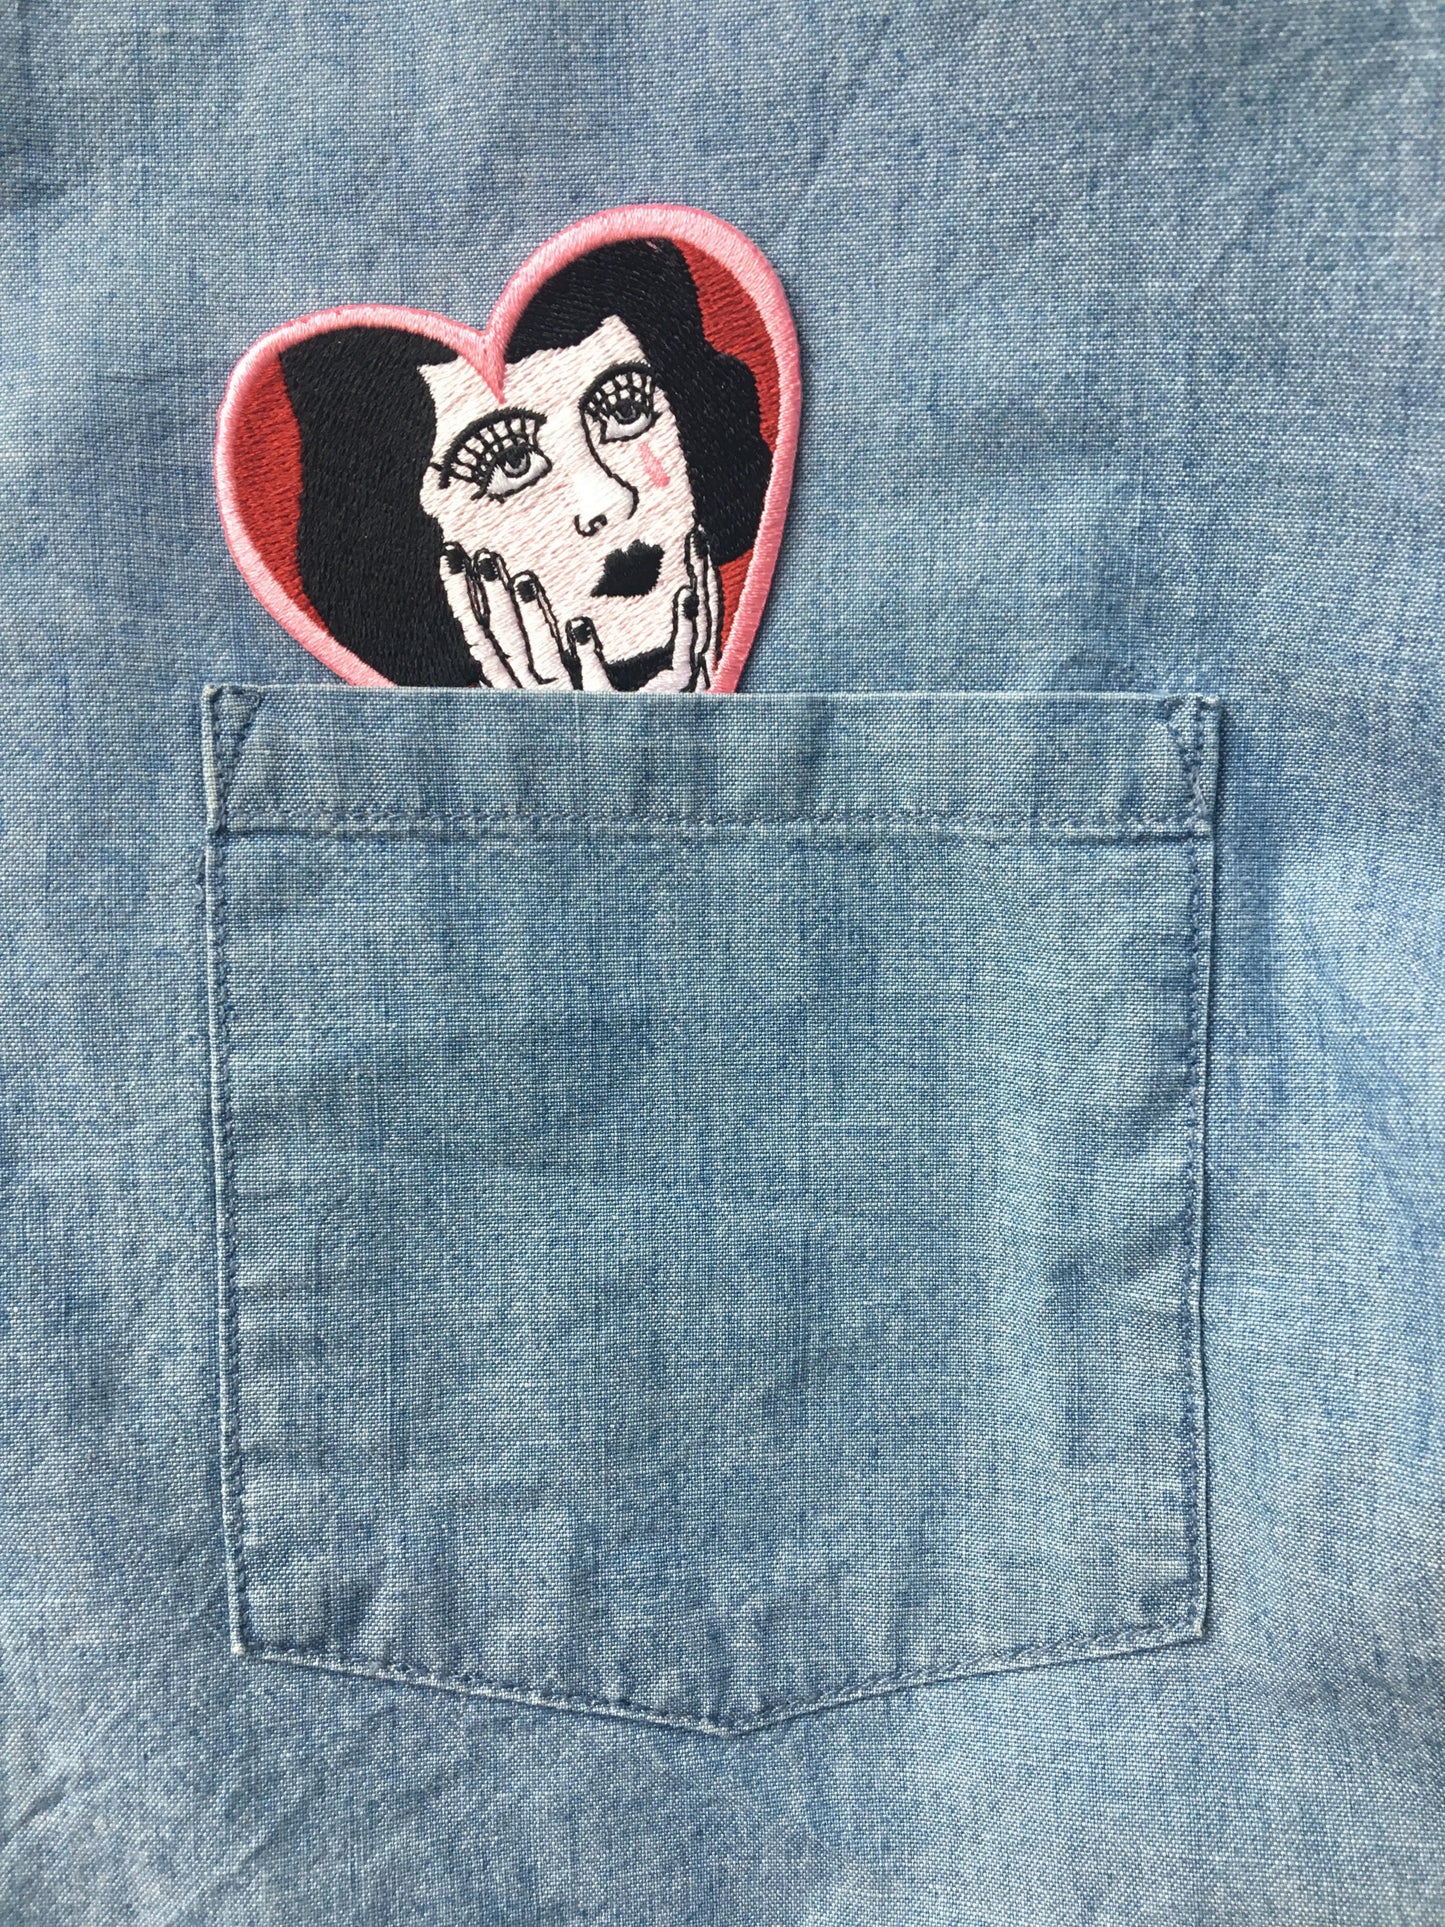 Cry lady, Iron on, patch, heart shape patch, illustration, gift, etsy, love patch